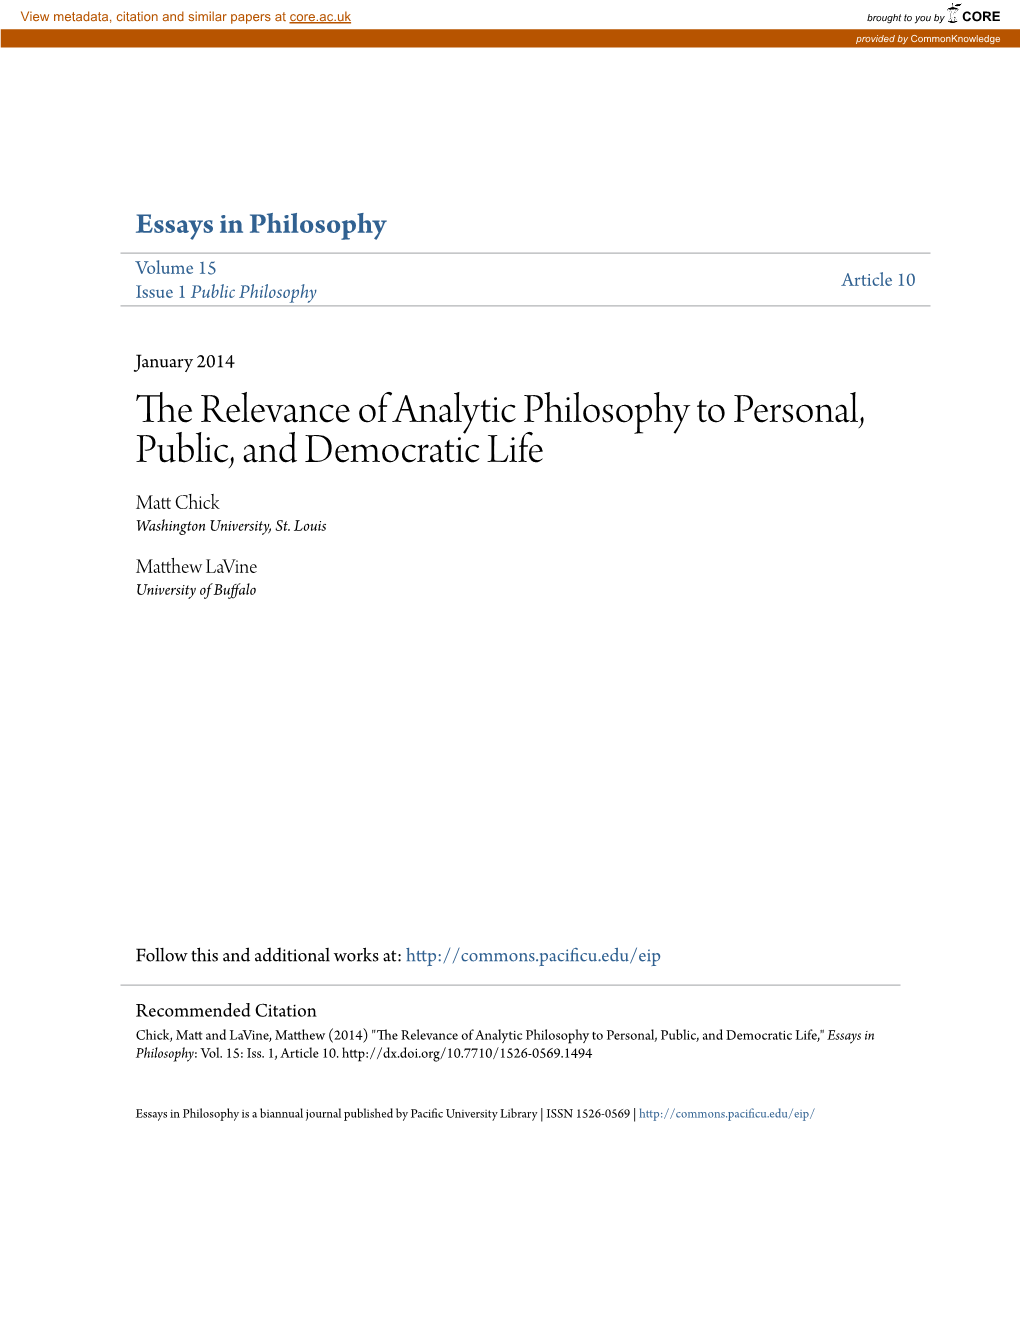 The Relevance of Analytic Philosophy to Personal, Public, and Democratic Life Matt Hickc Washington University, St